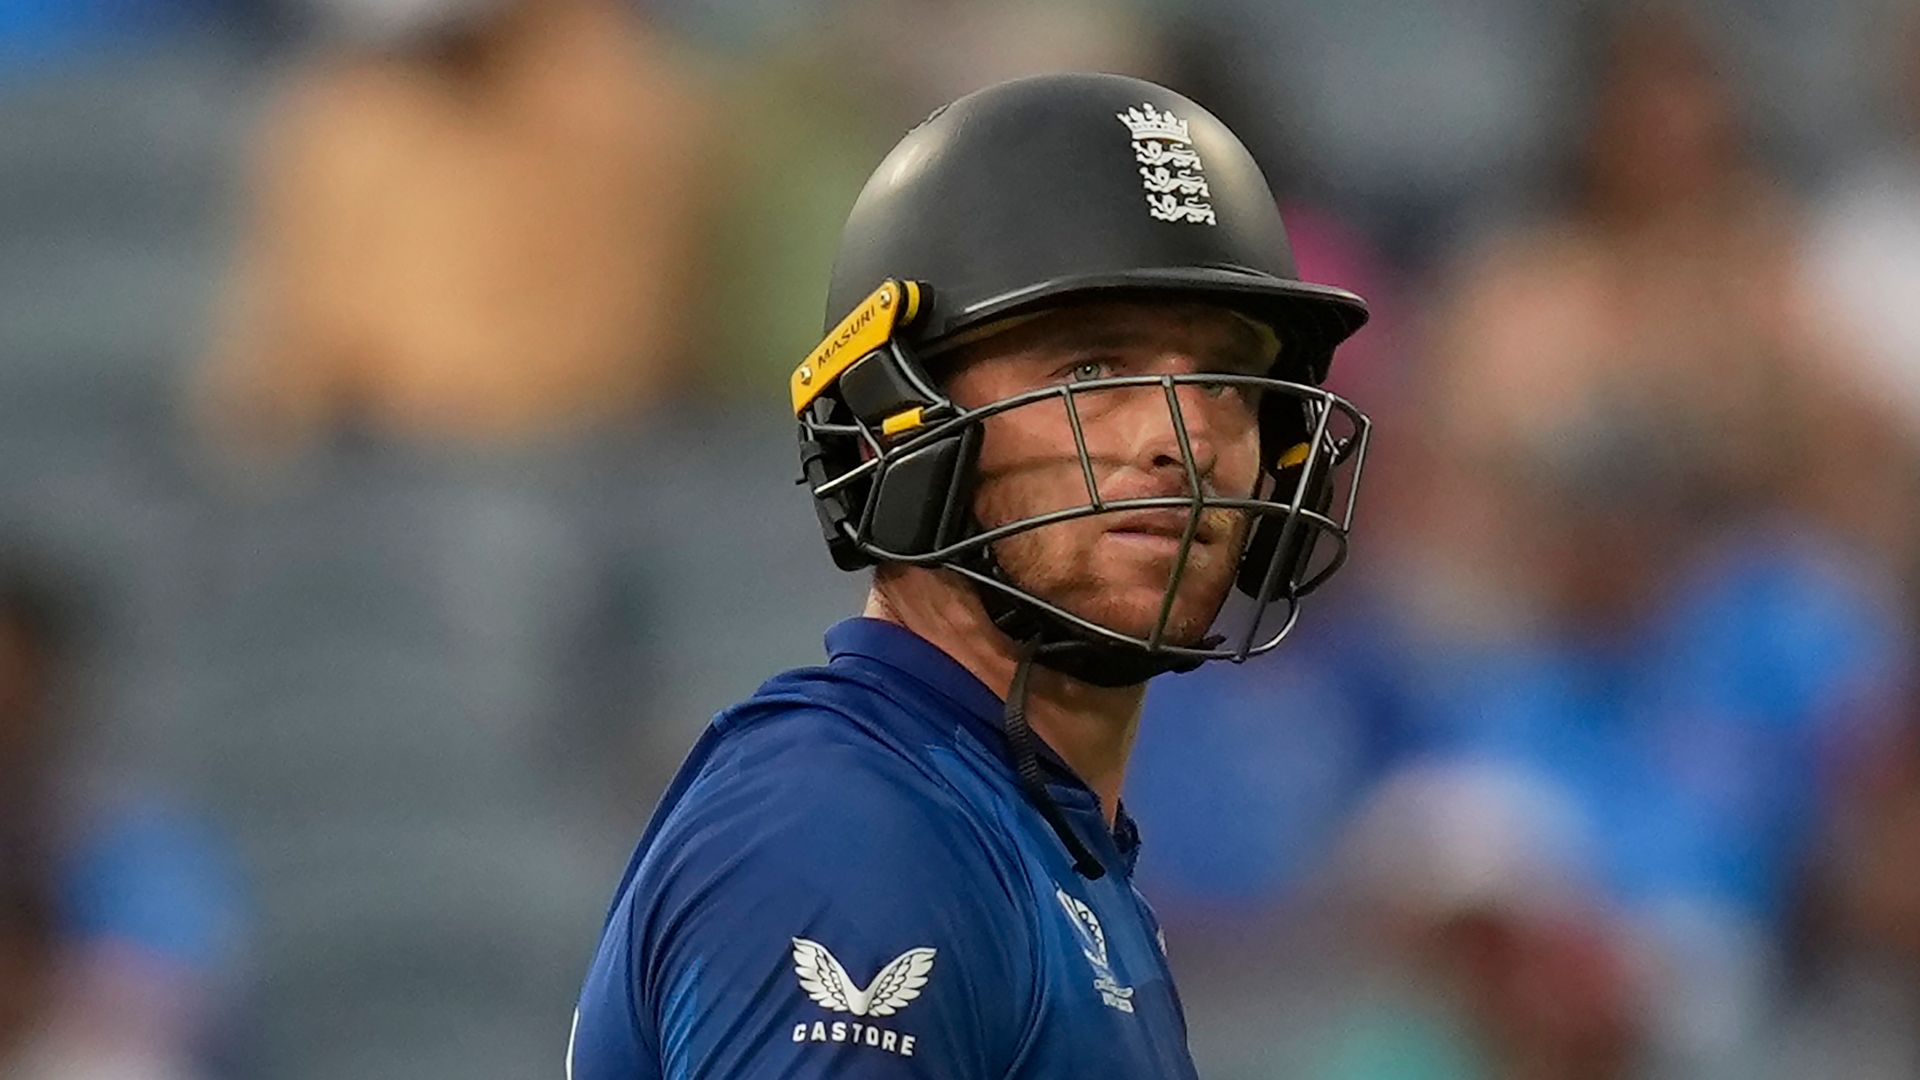 Can Stokes ton inspire 'horribly out of nick' Buttler?